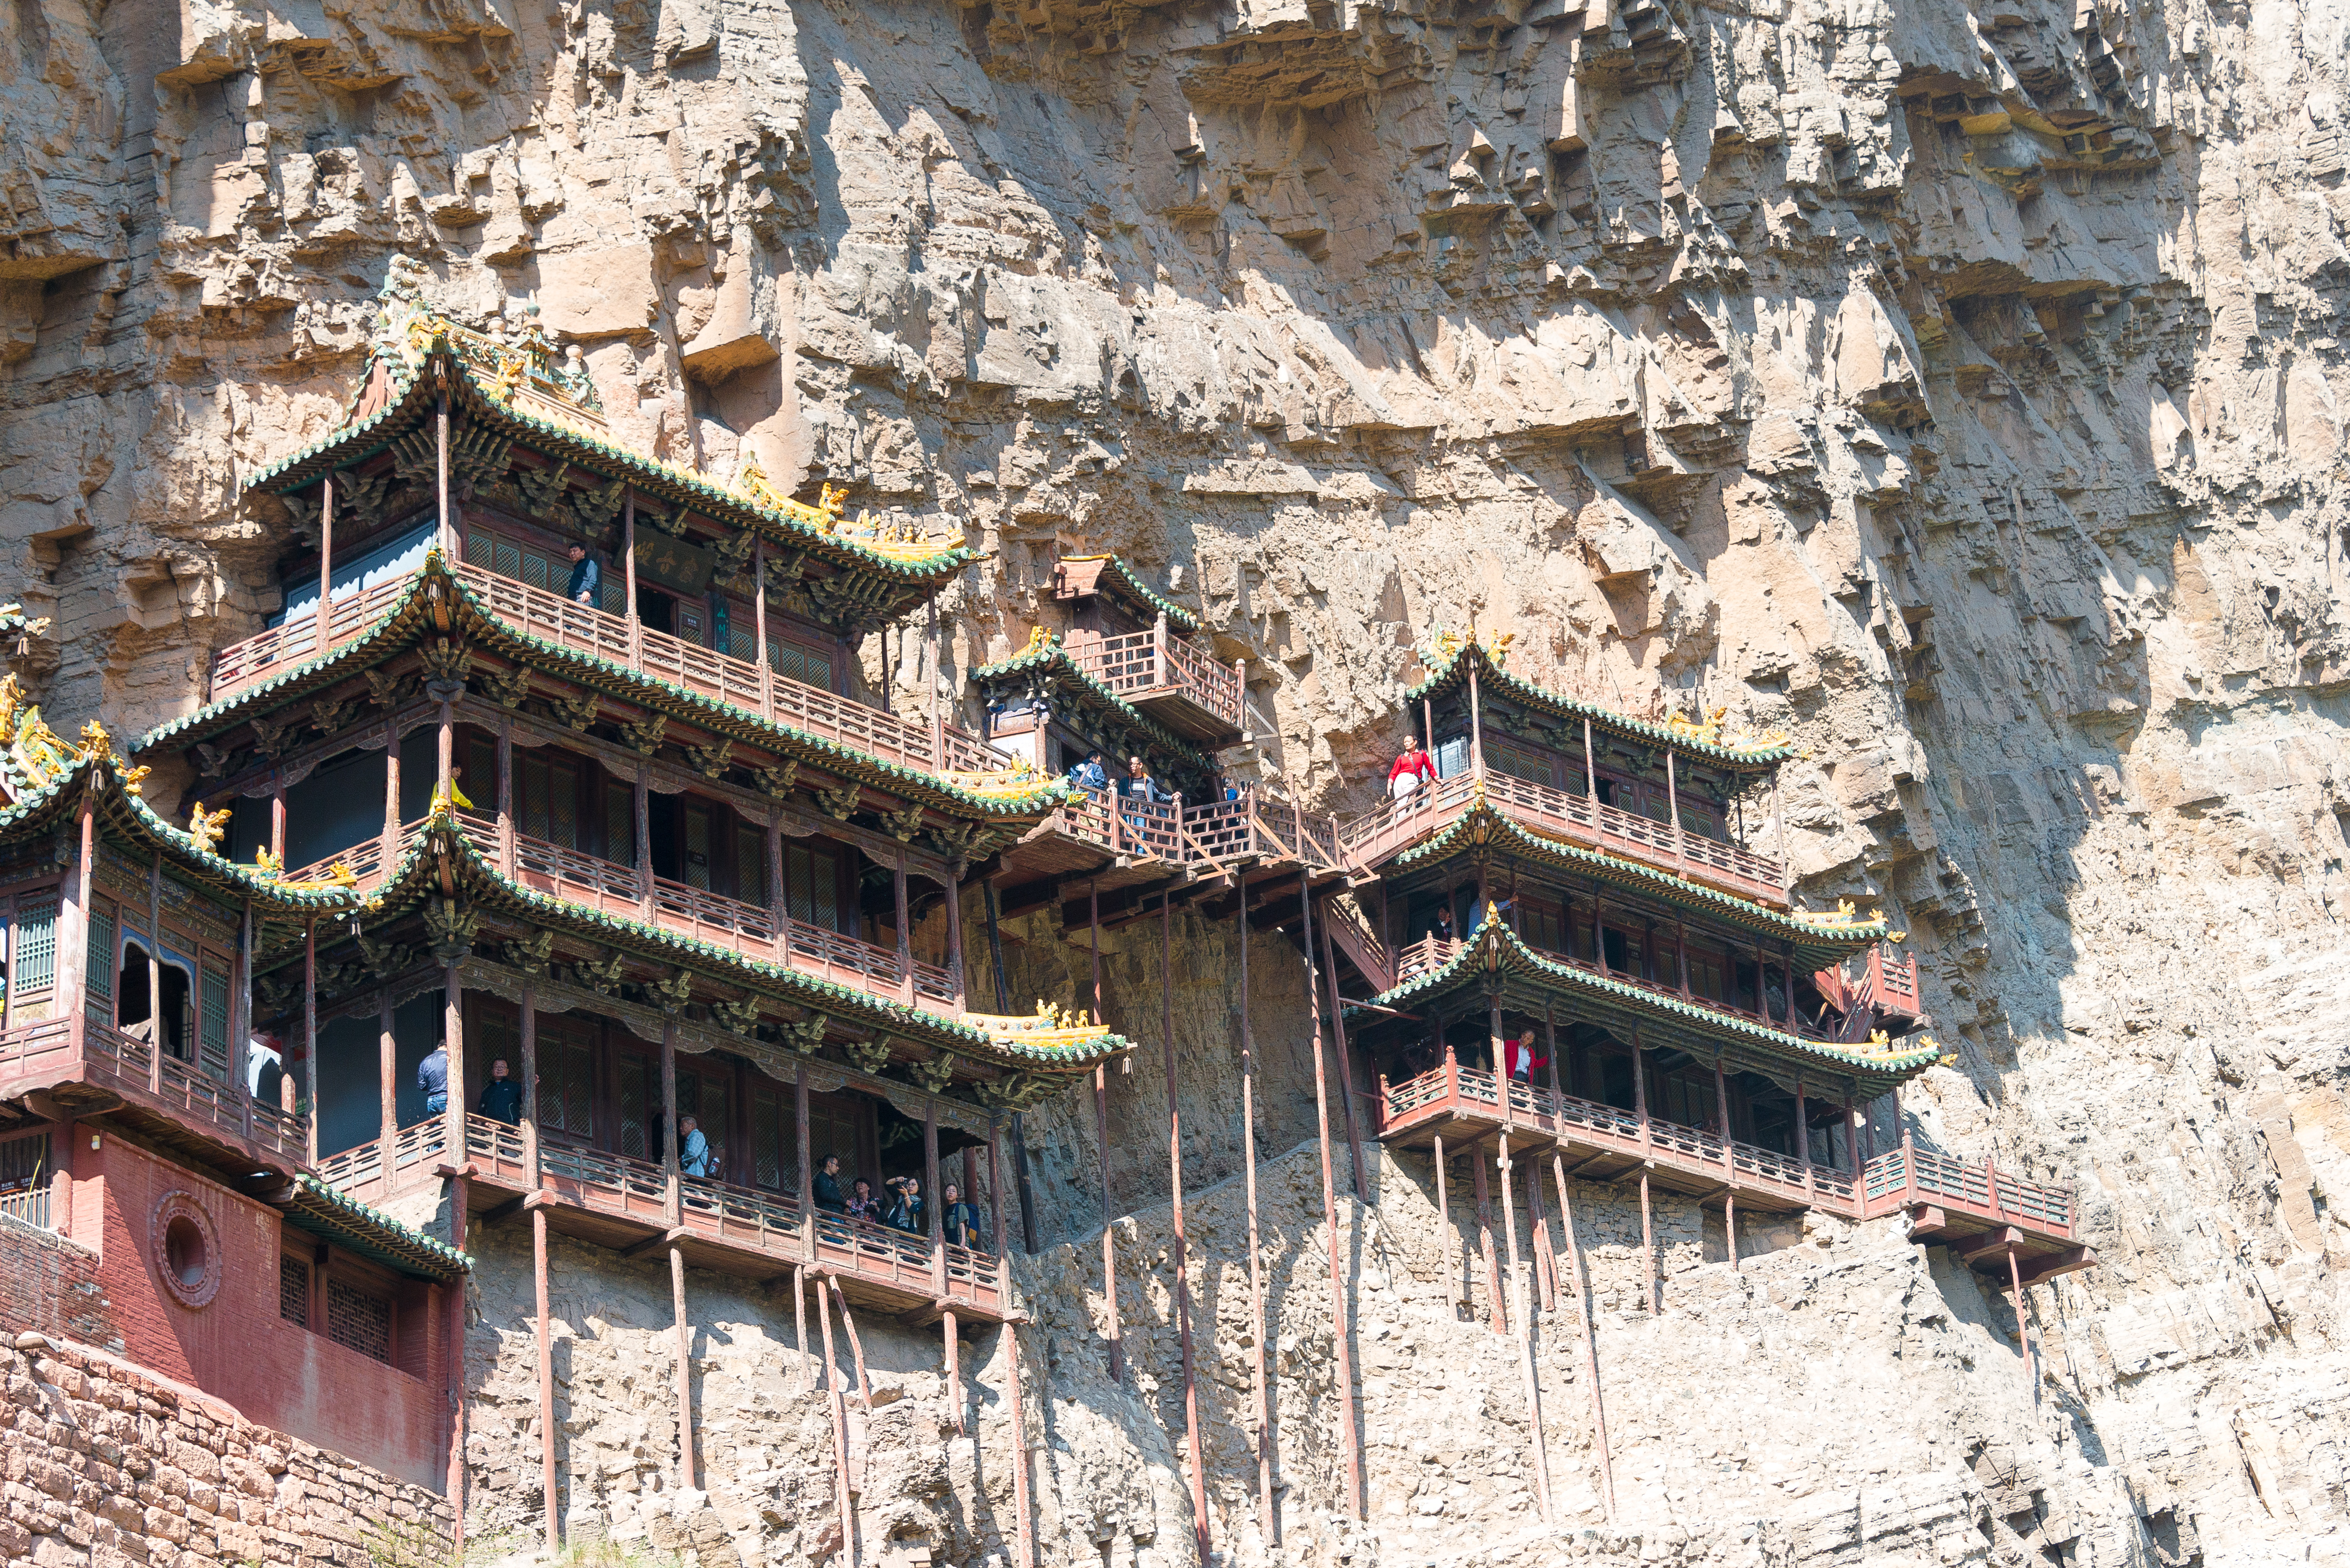 Check Out These Temples in Asia - Hanging Temple in Shanxi, China